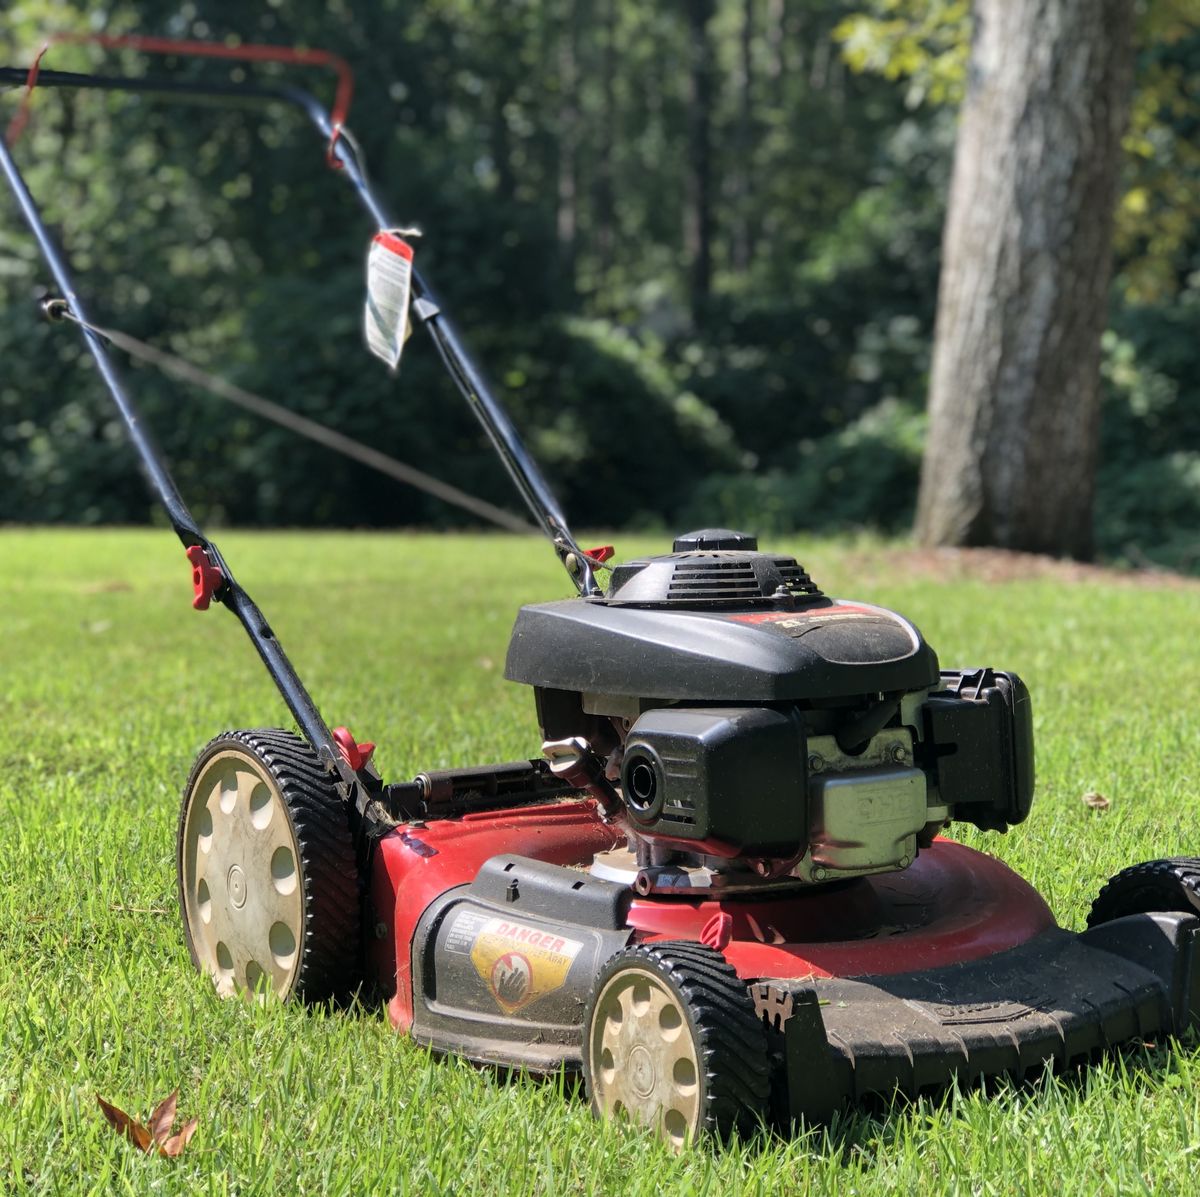 9 Steps To Winterize a Lawn Mower